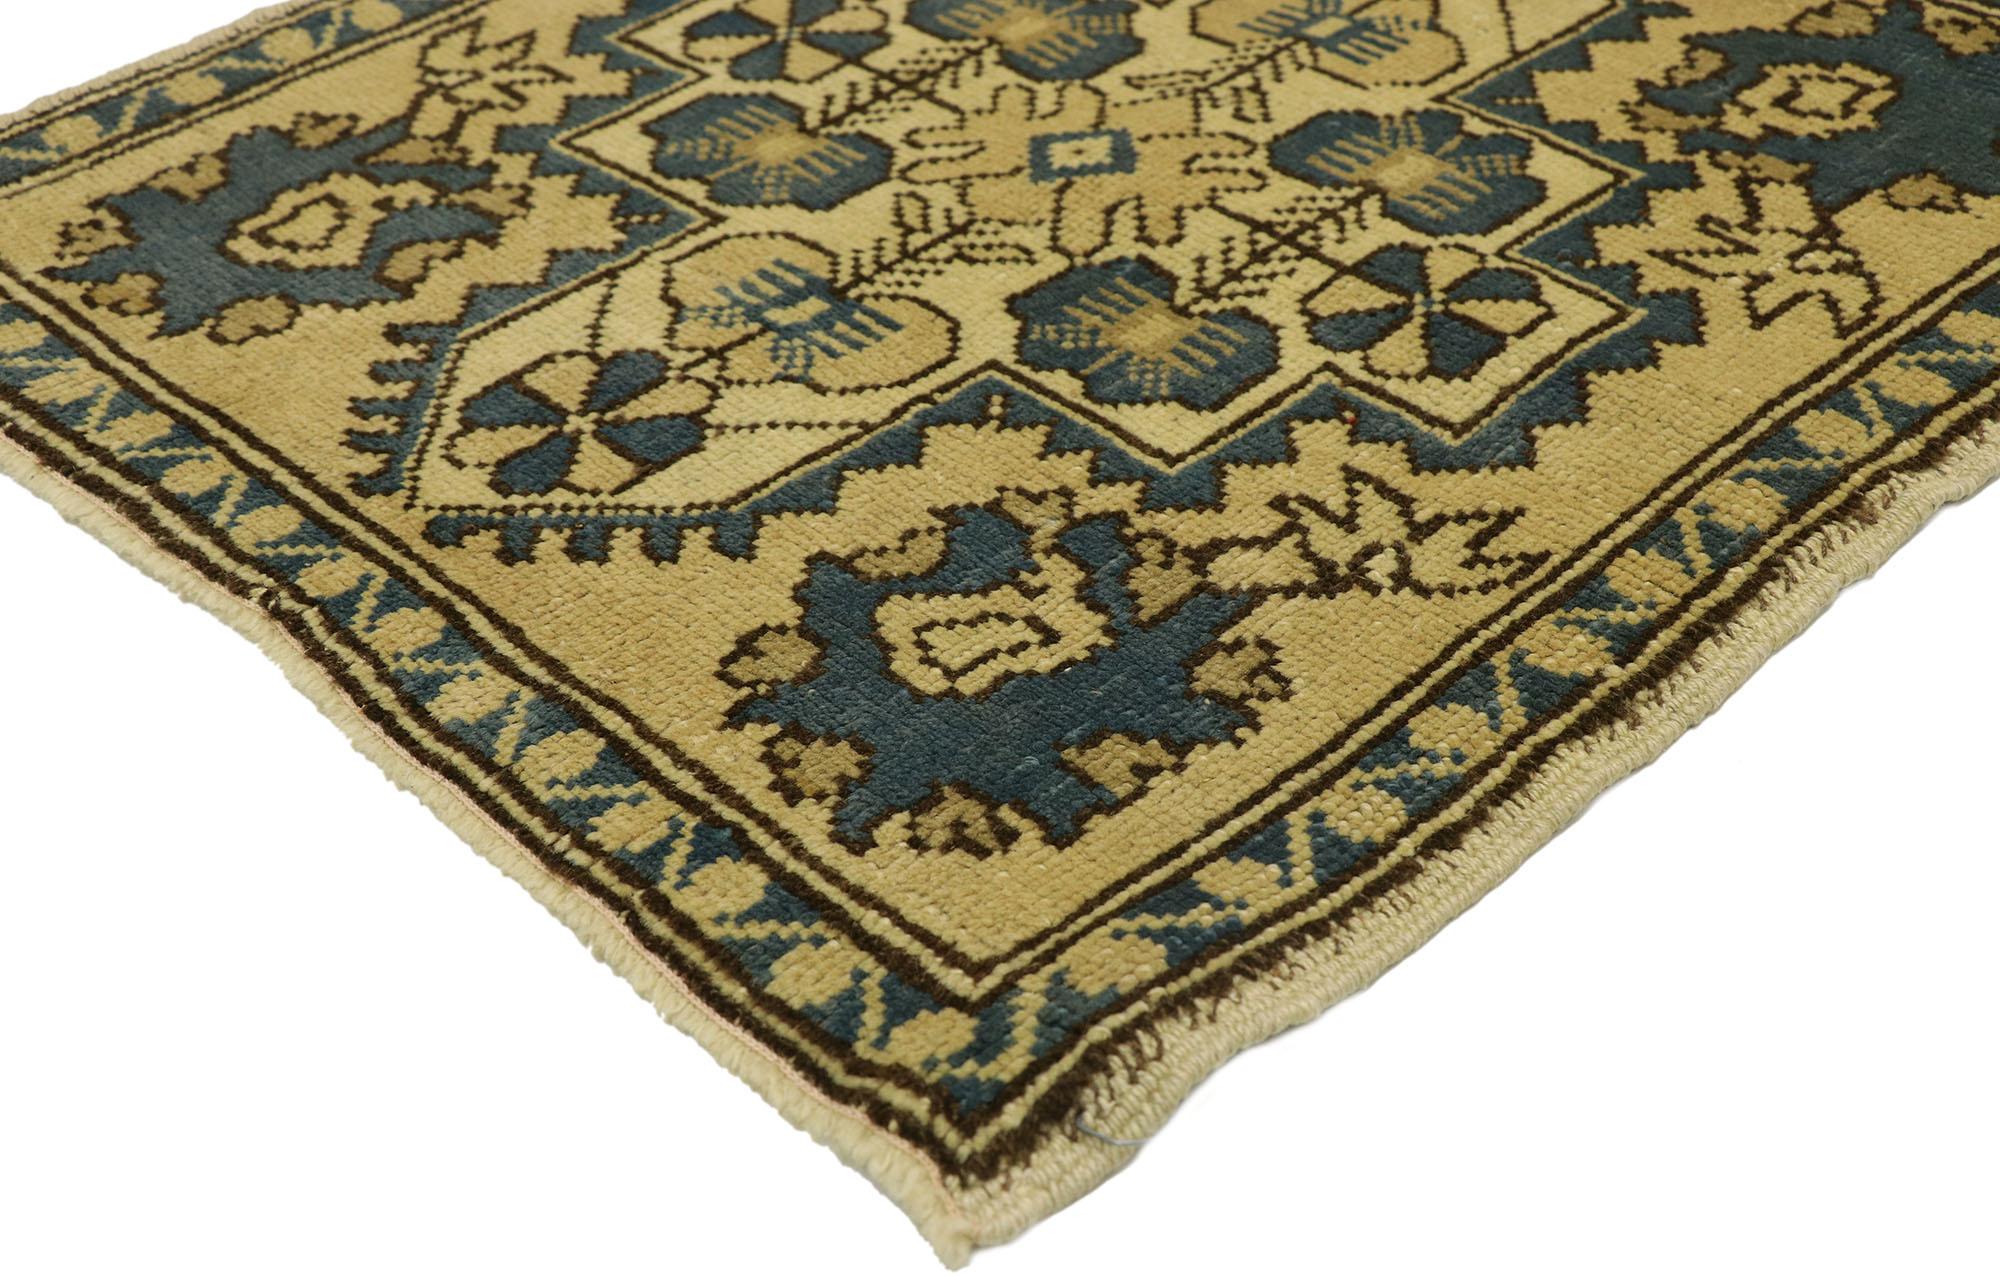 51259 Vintage Turkish Yastik Rug, 02'03 x 02'04. In this hand-knotted wool vintage Turkish Yastik rug, effortless grace and subtle refinement come together to form a captivating piece imbued with a hint of Mediterranean charm. The ecru-tan